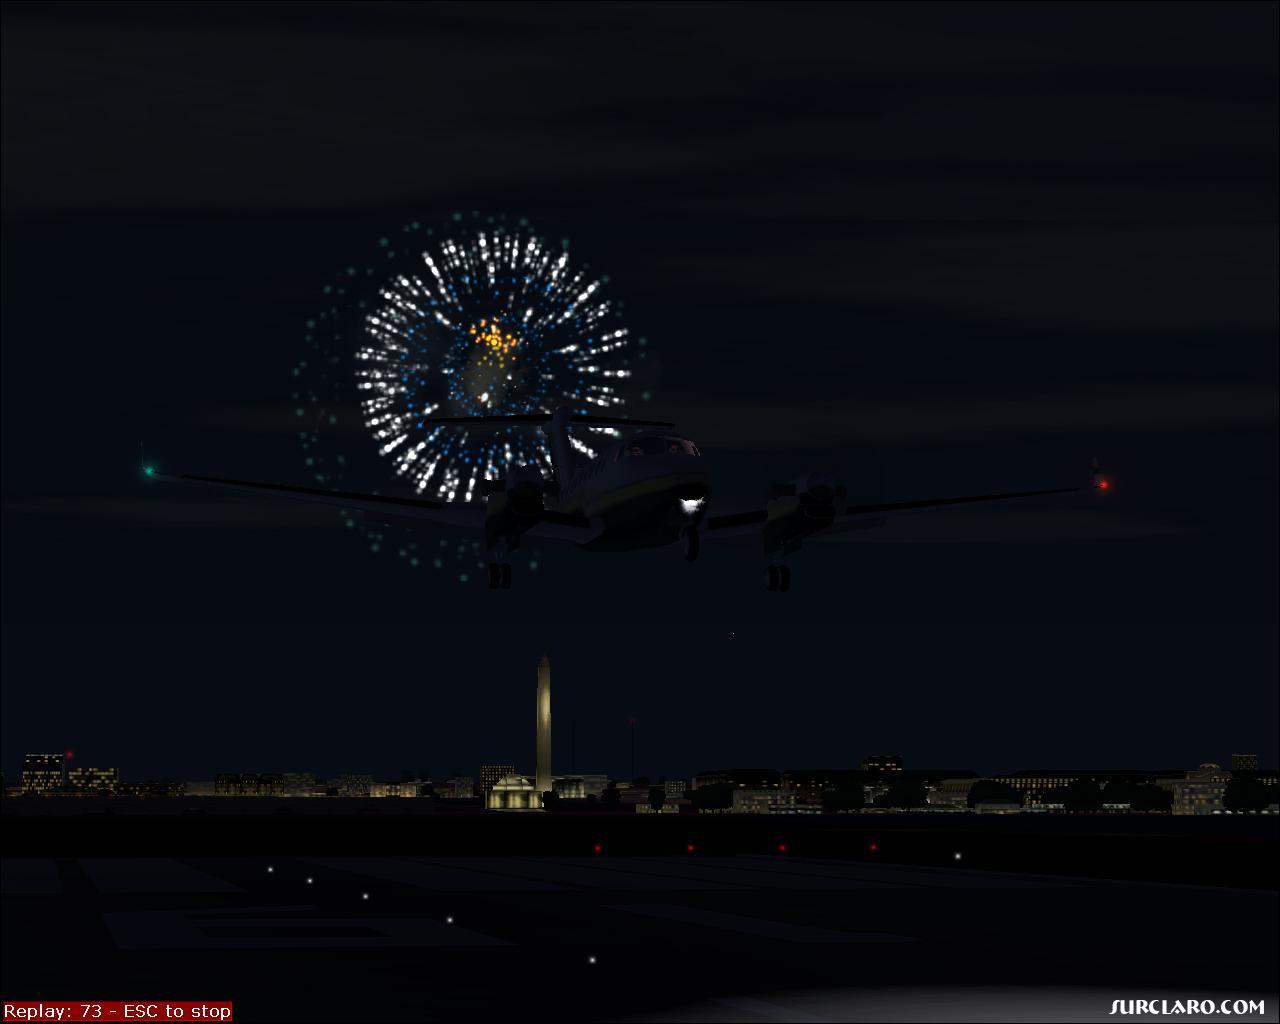 A king Air landing at Washington's Ronald Reagan Intl. while celebrating the 4th of July festivities. Fireworks!! - Photo 568